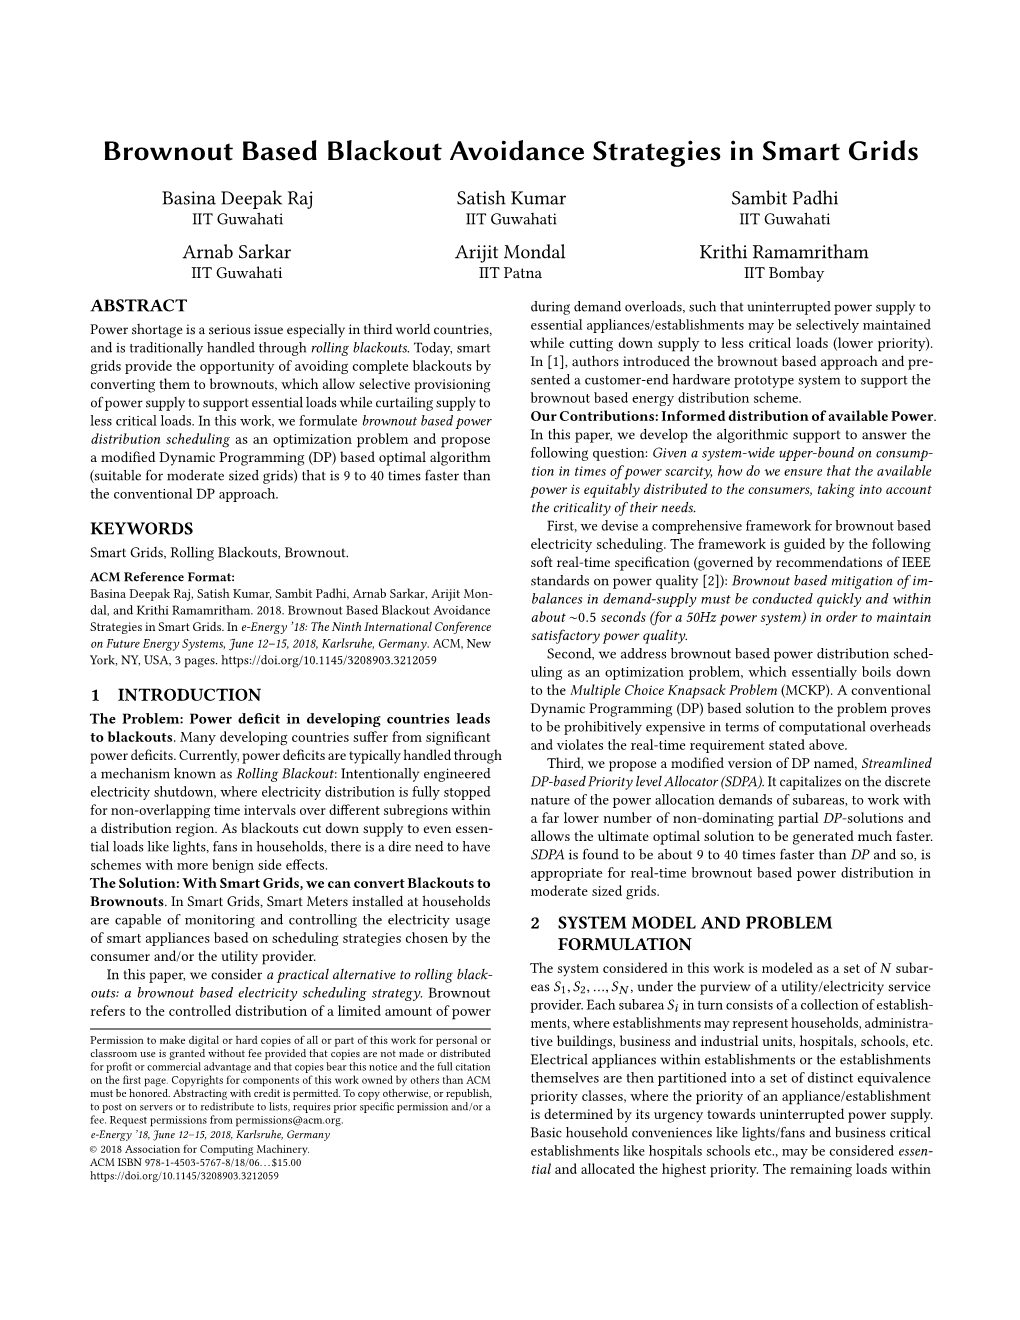 Brownout Based Blackout Avoidance Strategies in Smart Grids